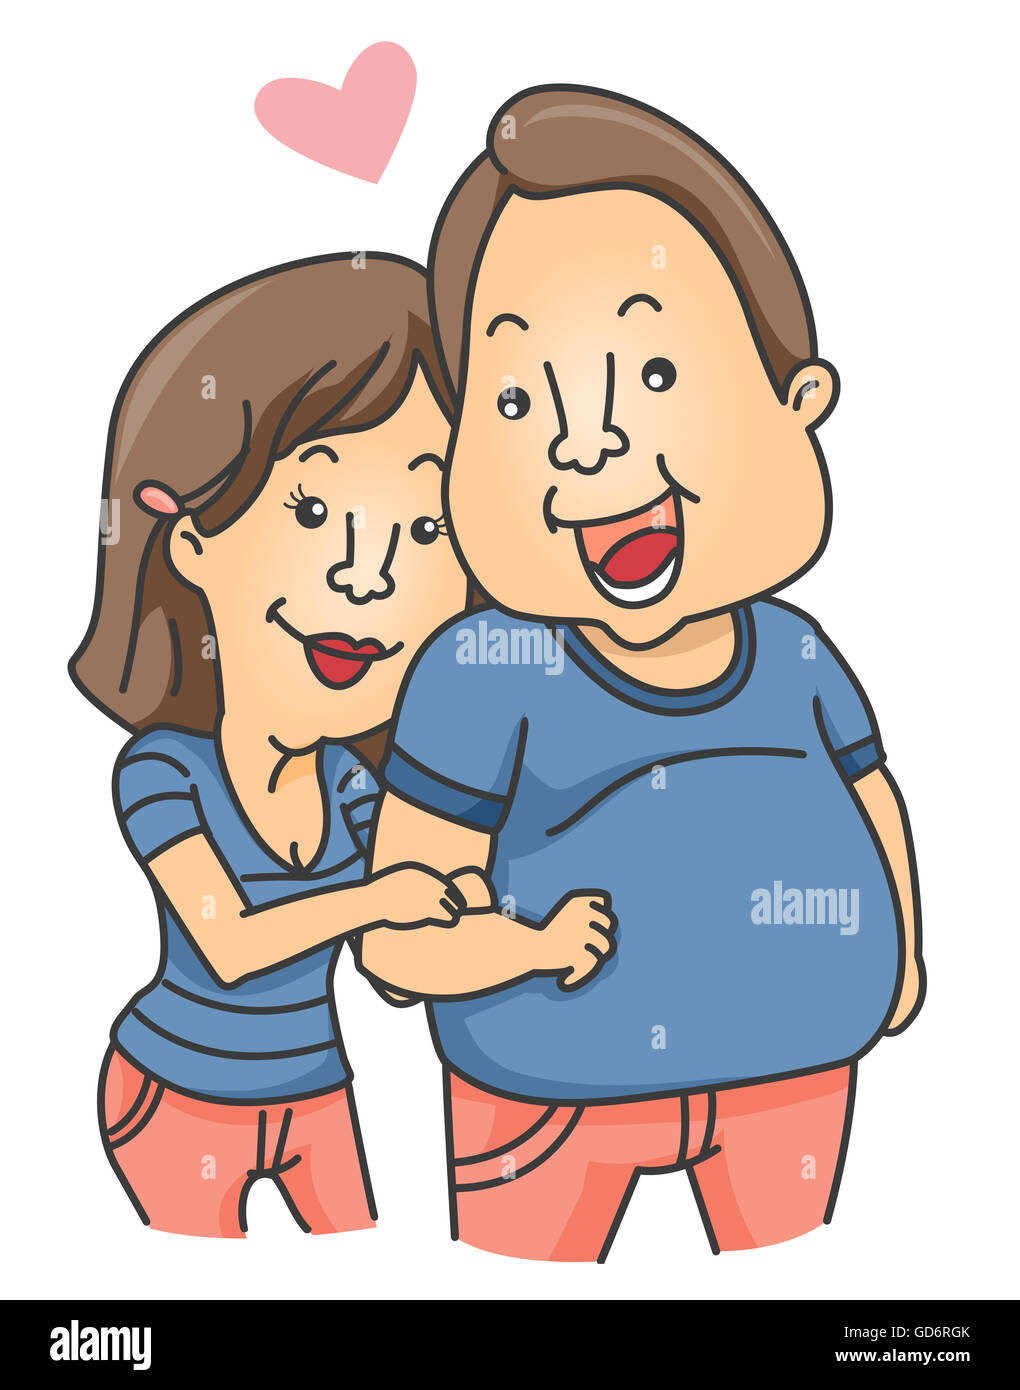 Illustration of a Woman Clinging to the Arm of Her Boyfriend Stock Photo